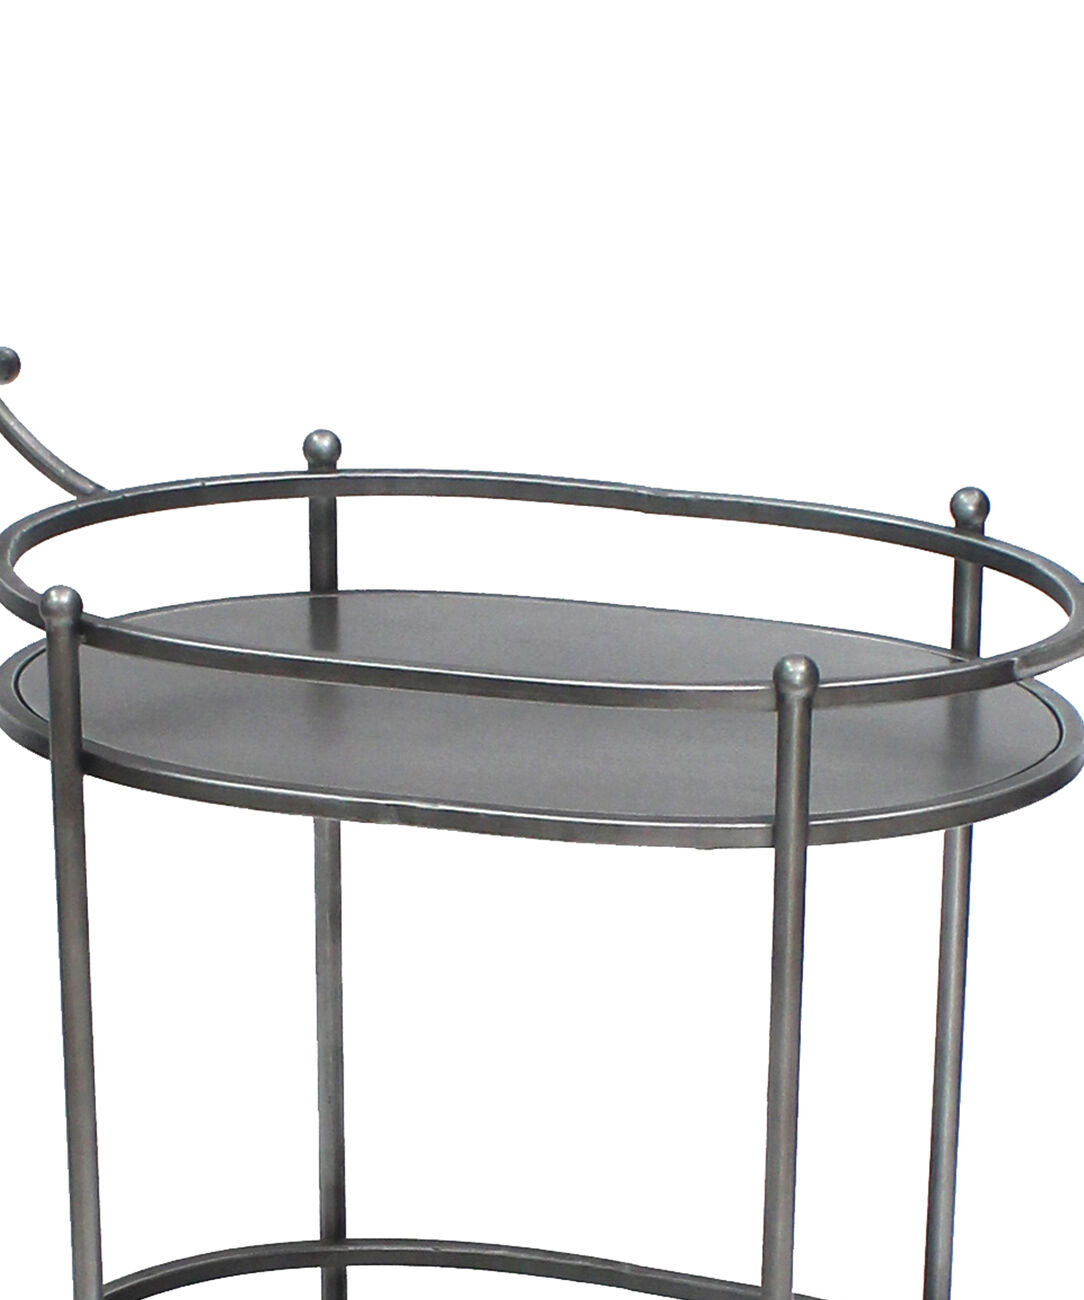 Oval Metal Frame Service Cart with Casters, Gray and Black